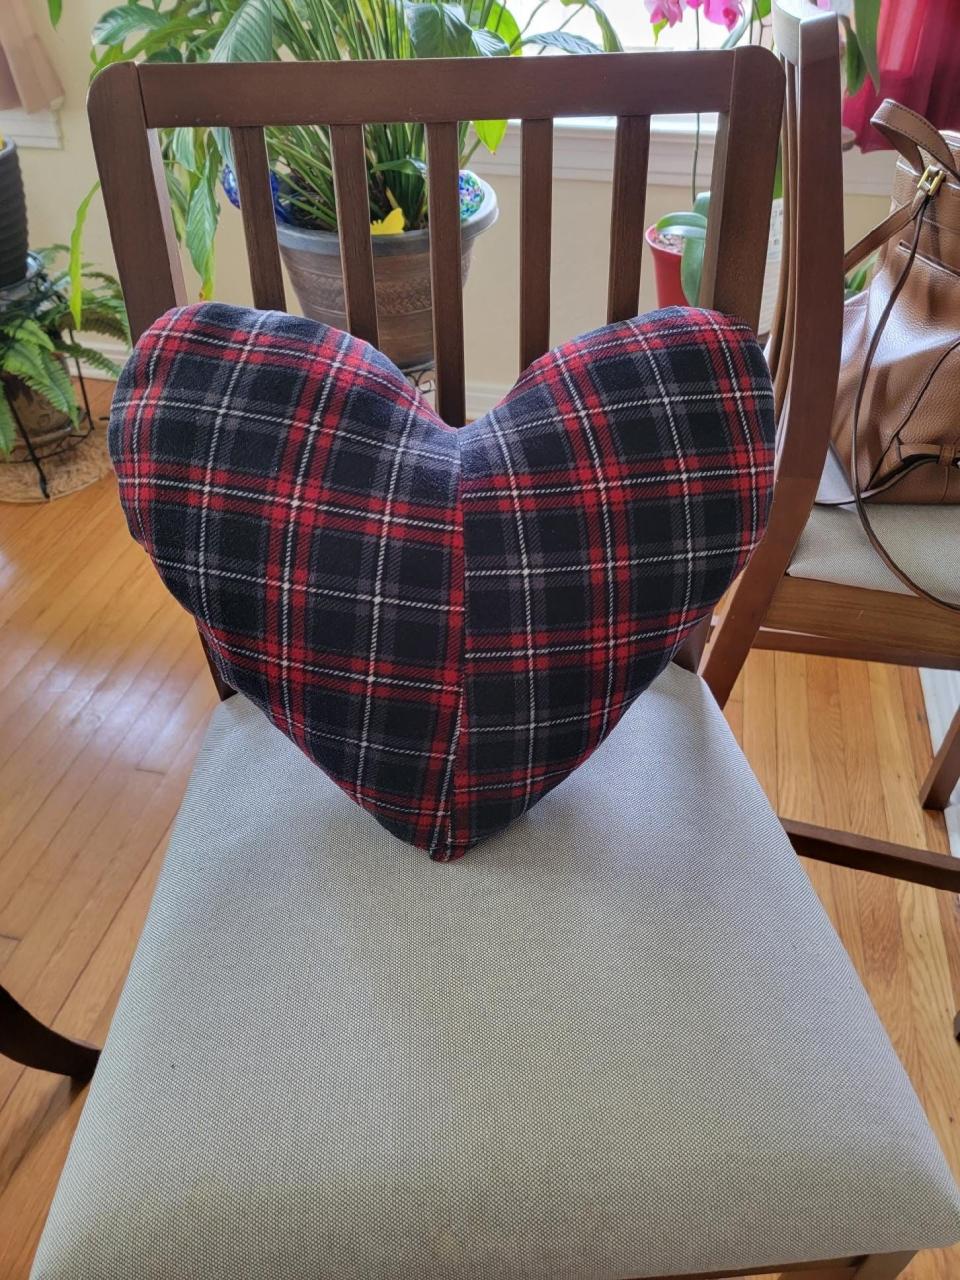 Pat Hemsley, a volunteer for Community Hospice, made this "memory pillow" for the family of Charles McVey, who died in April. One side is made from his favorite pajamas, and the other side is part of an old pocket T-shirt, the kind he wore during a long career as a trucker.